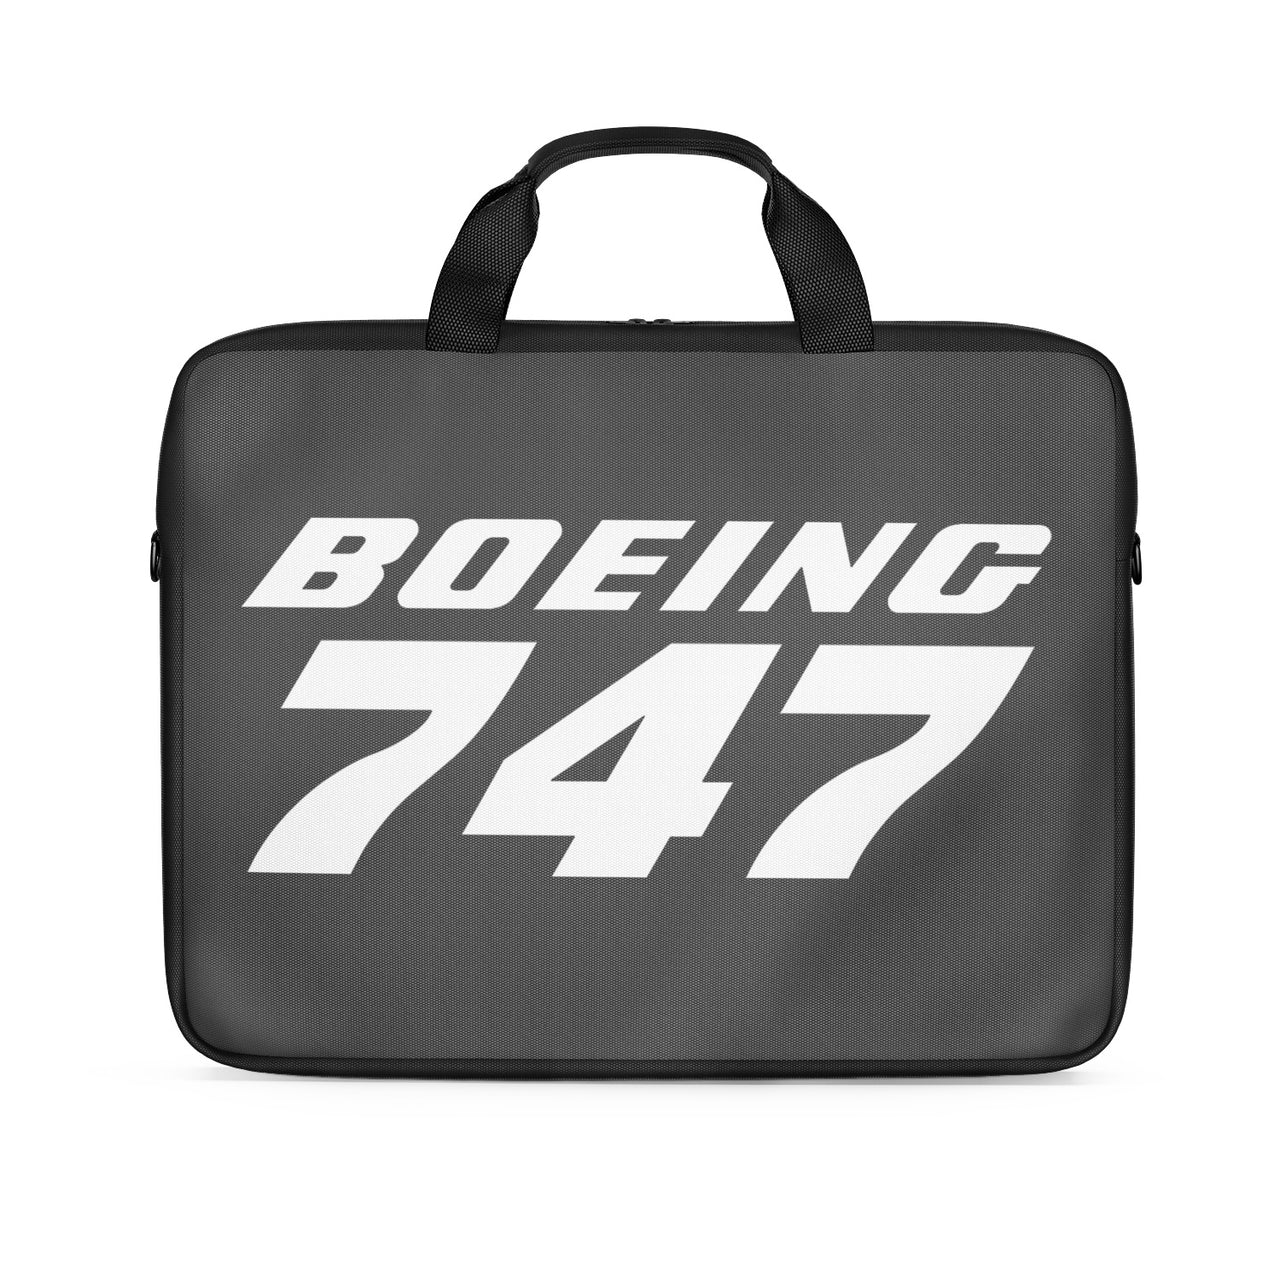 Boeing 747 & Text Designed Laptop & Tablet Bags